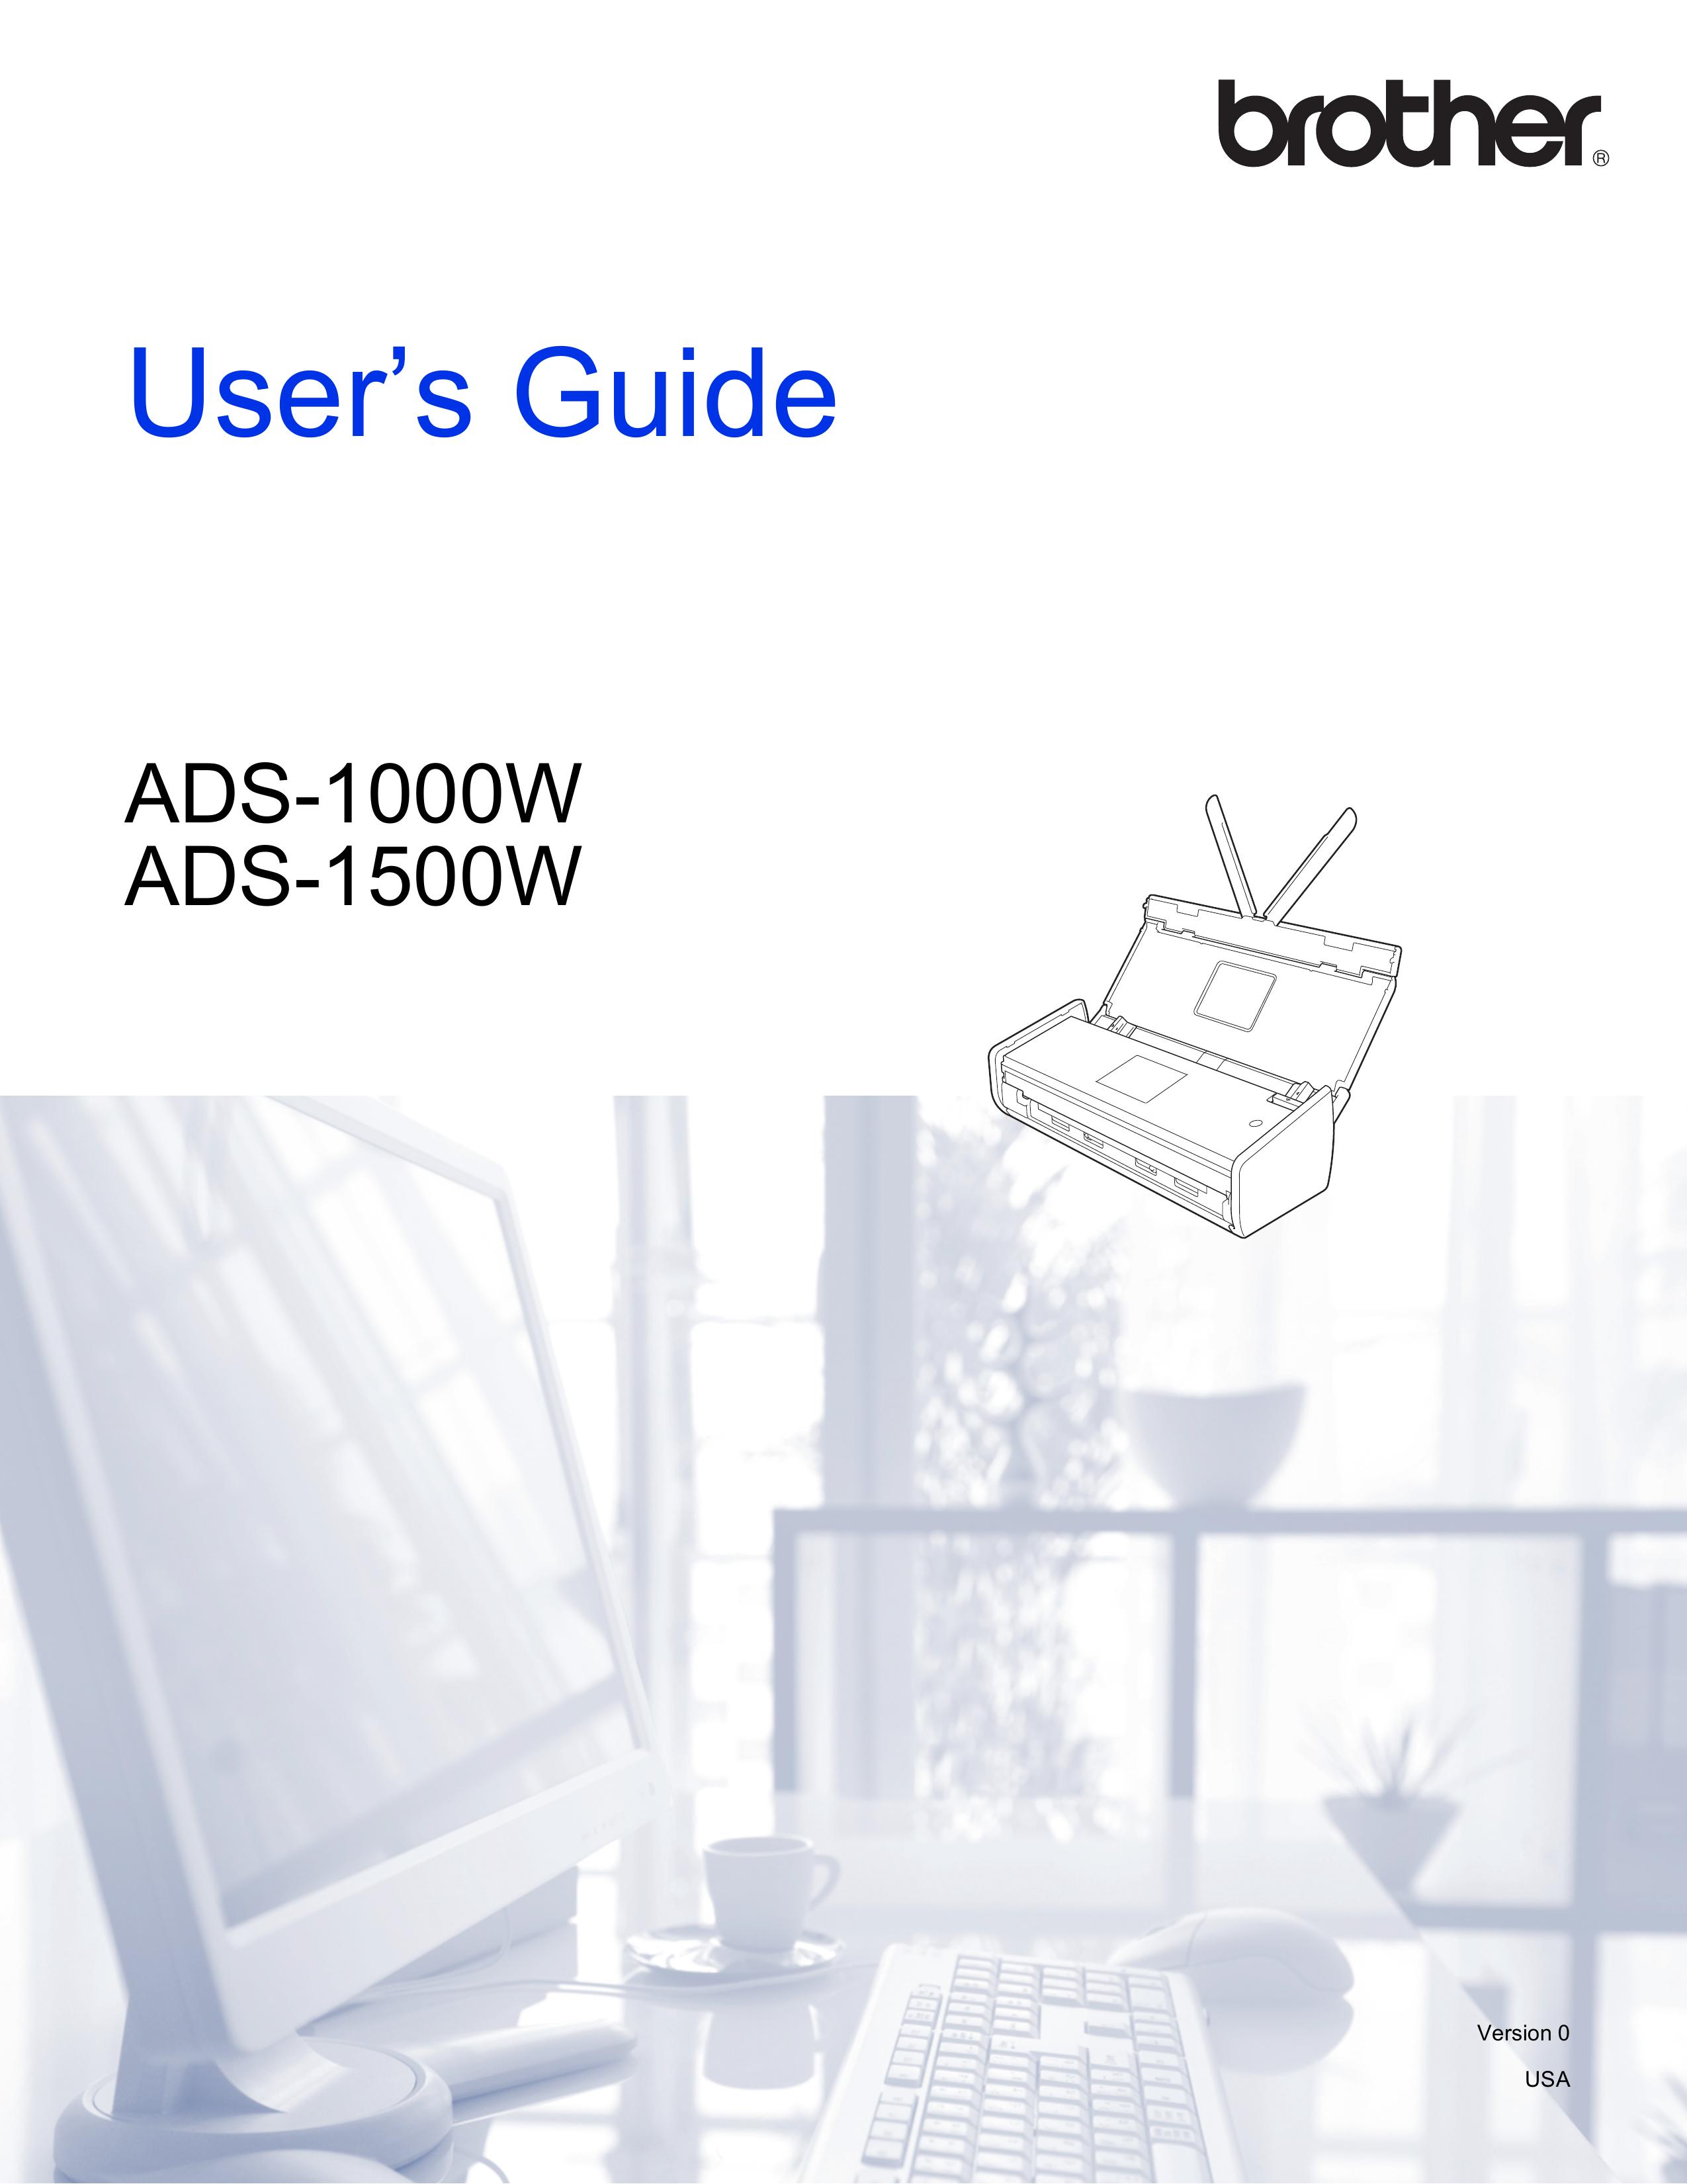 Brother ADS-1000W Photo Scanner User Manual (Page 1)